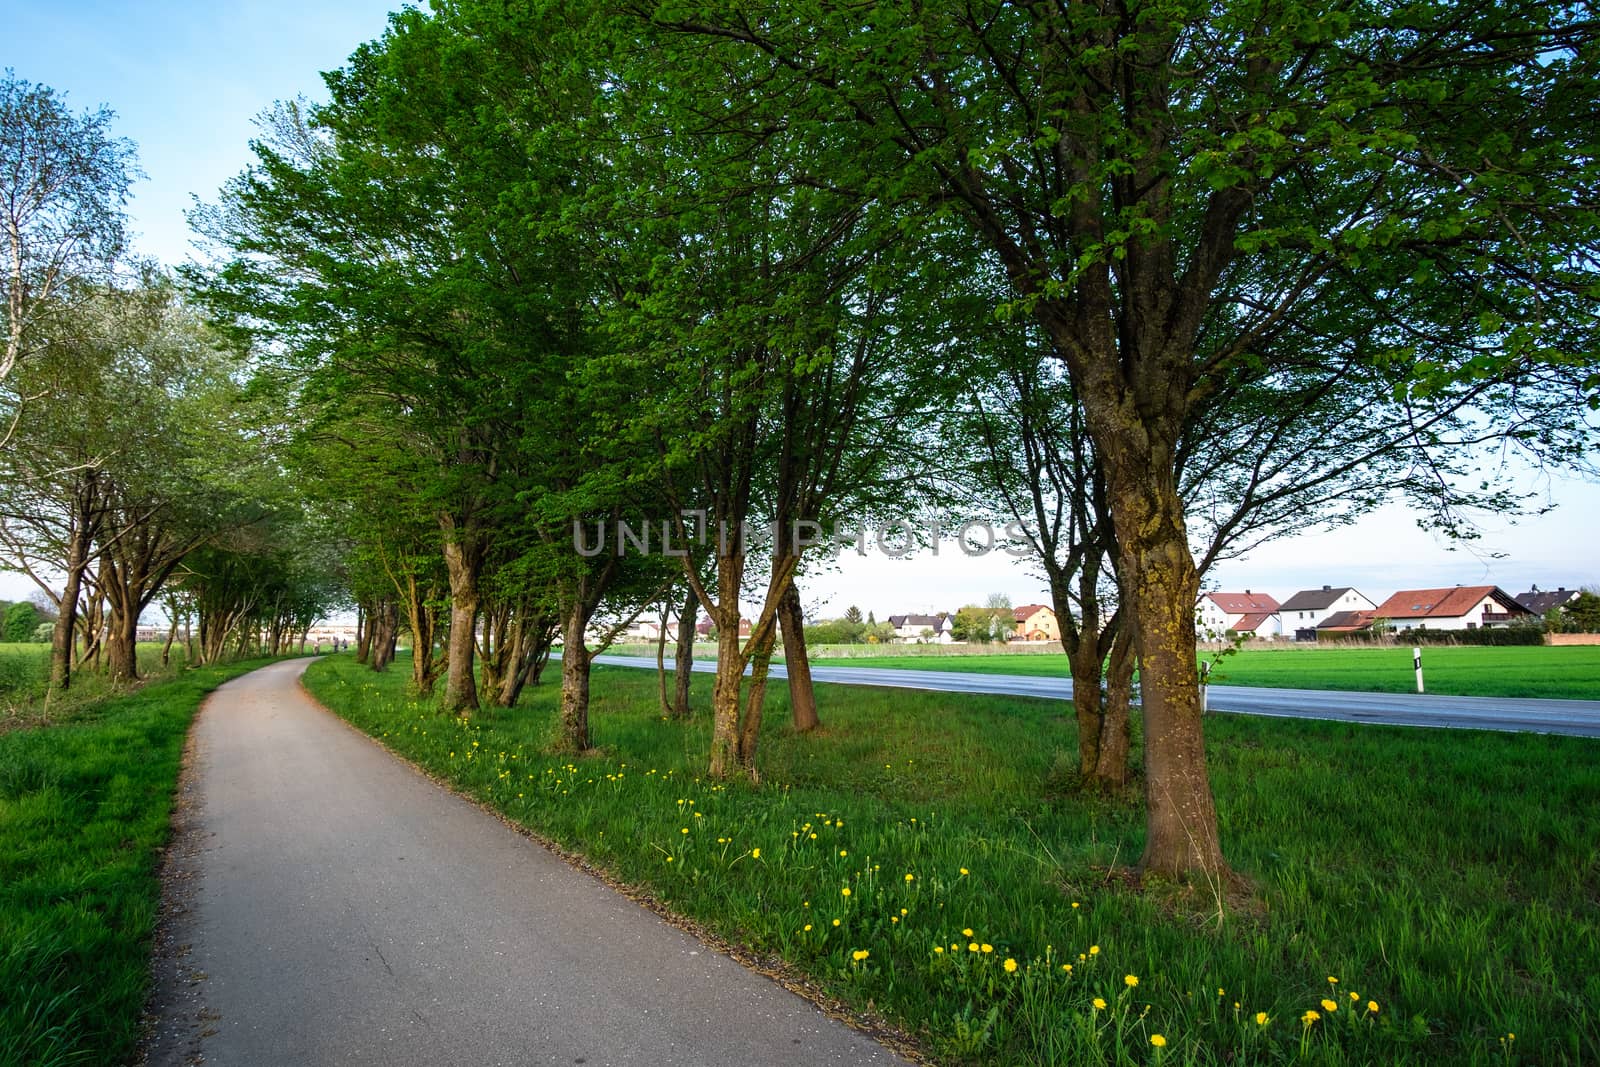 image of a bikeway and walkway with trees and grean meadow near Maisach, Bavaria, Germany